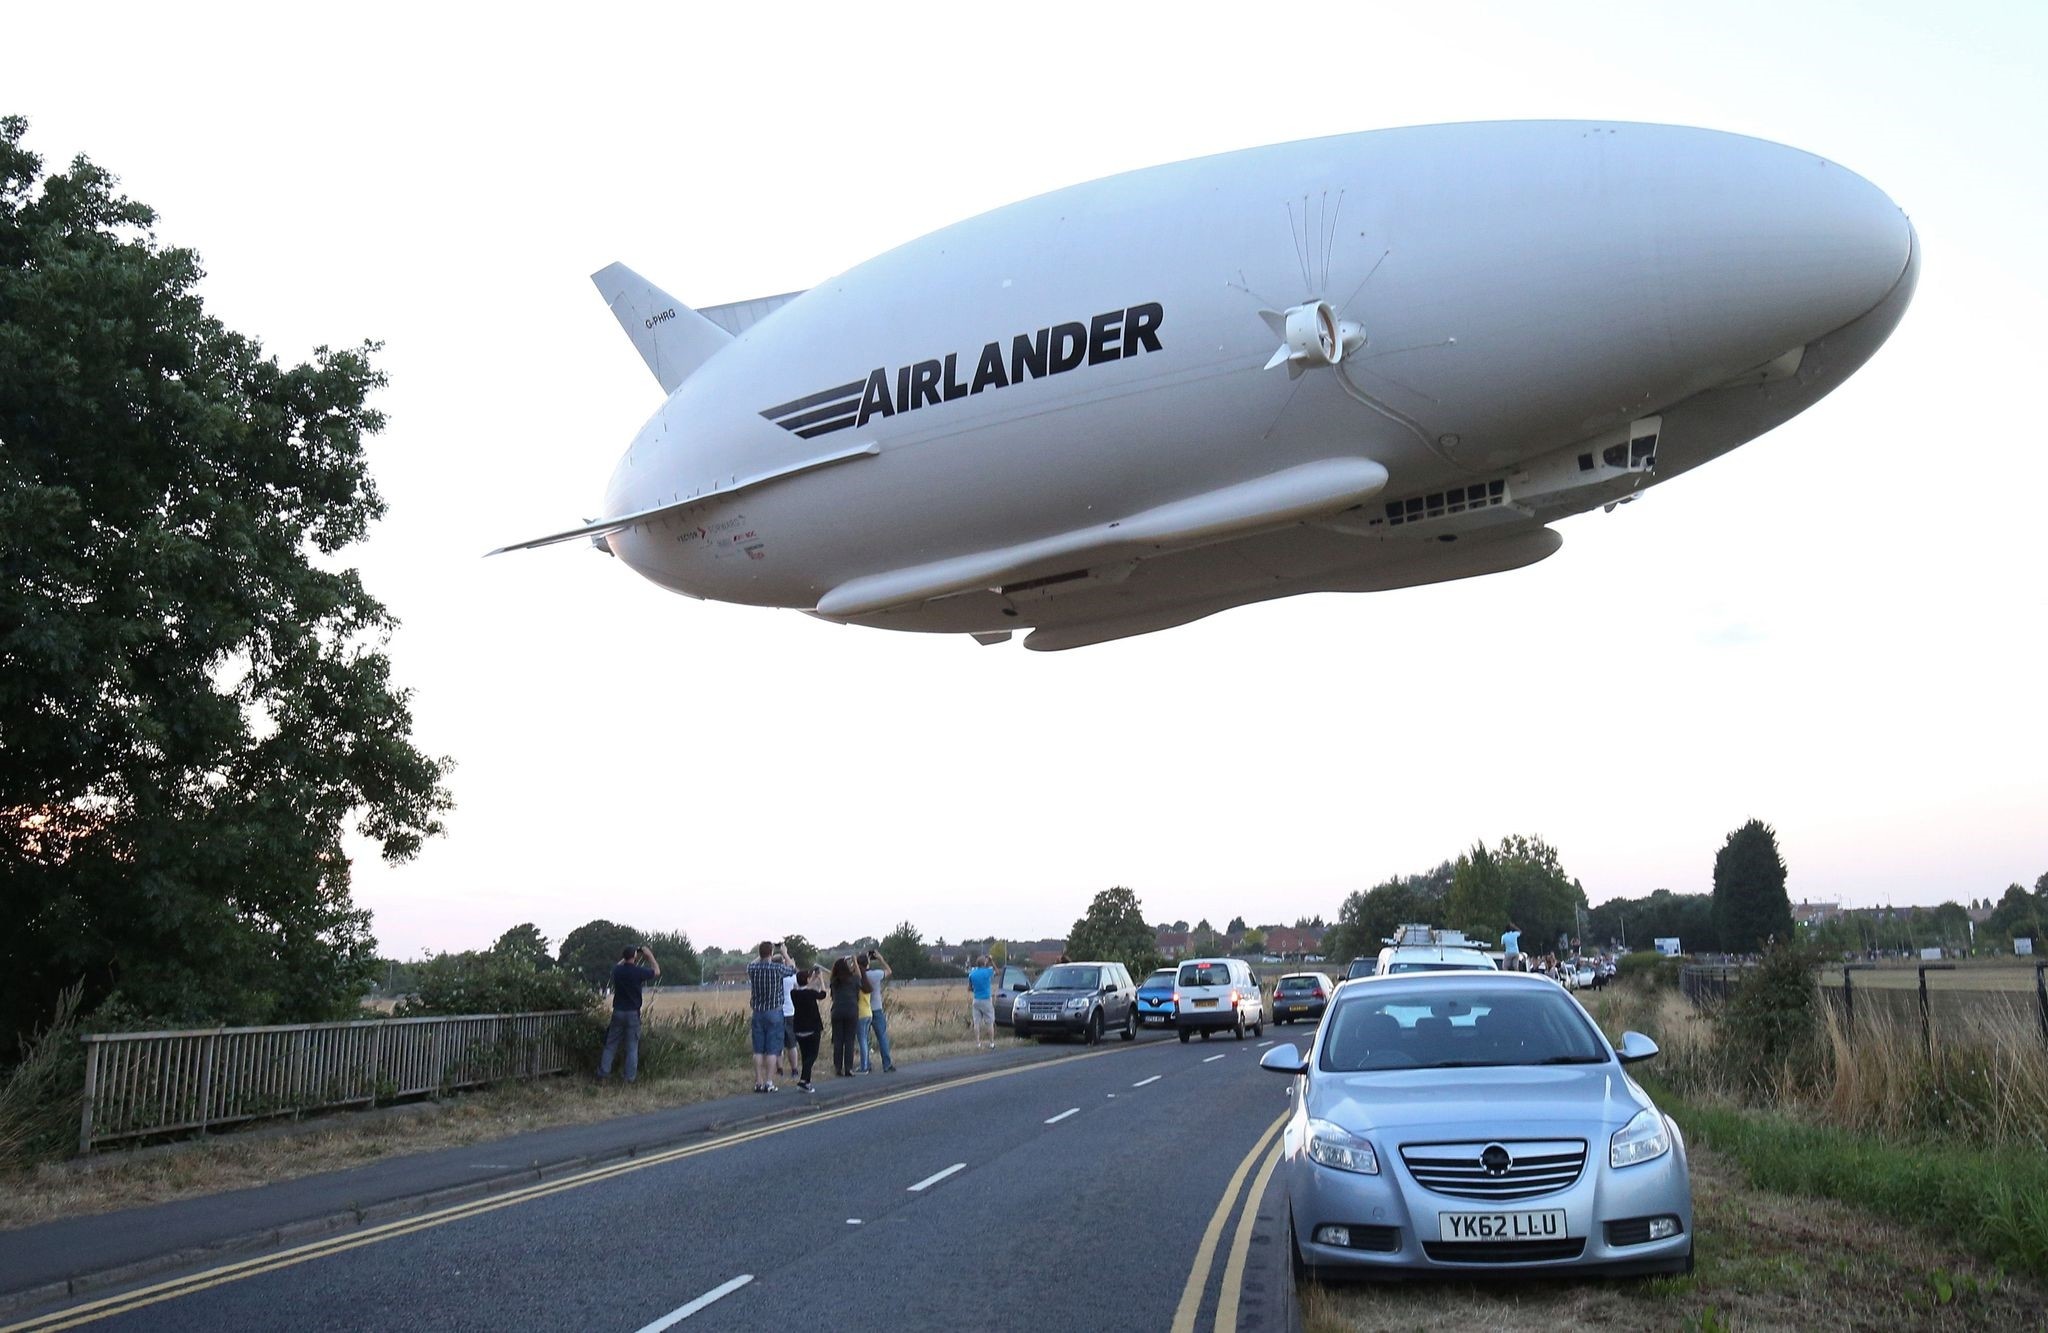 his file photo taken on August 17, 2016 shows the Hybrid Air Vehicles HAV 304 Airlander 10 hybrid airship in the air over a road on its maiden flight from Cardington Airfield. (AFP Photo) 